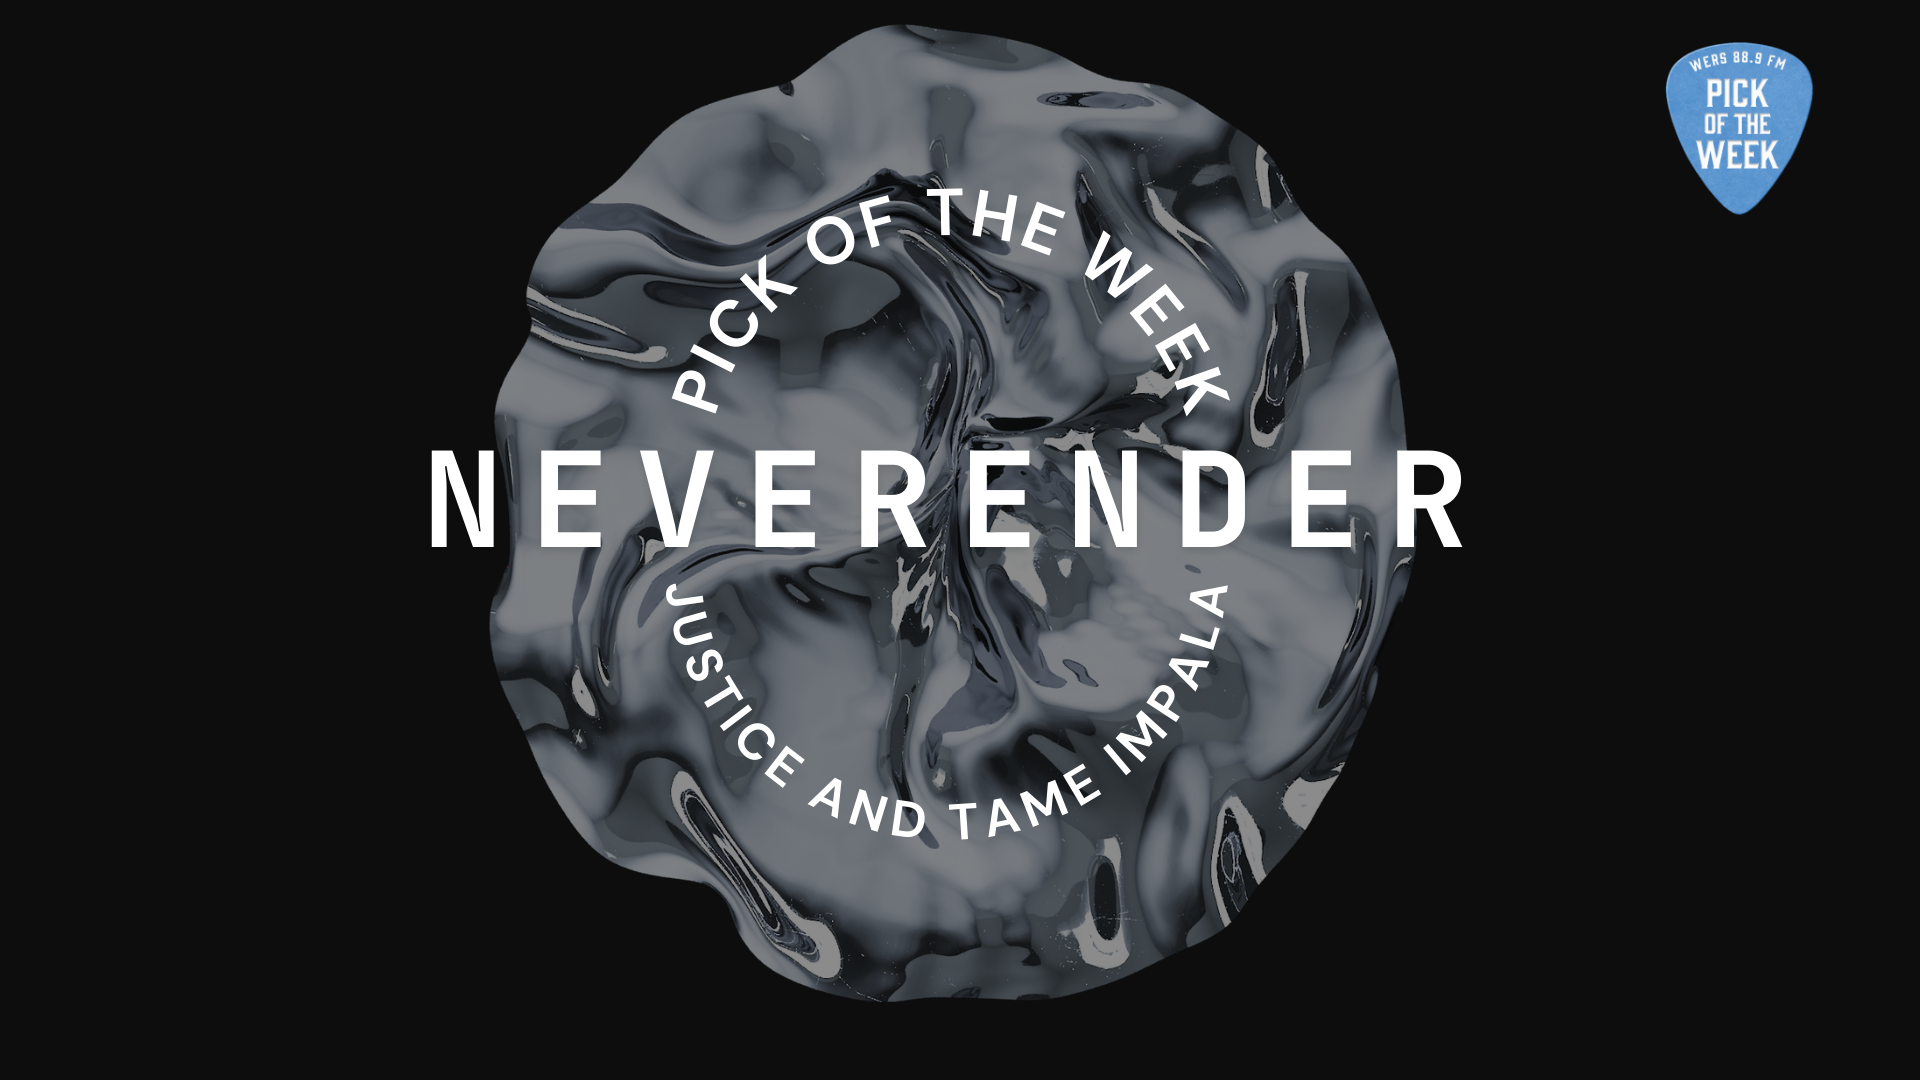 An illustration of a sphere of crinkled, silver-colored metal, with a black background. Over the sphere is white text that reads: "Pick of the Week: Neverender, Justice and Tame Impala." In the top right corner is a light blue guitar pick with white text that reads: "WERS 88.9 Pick of the Week"